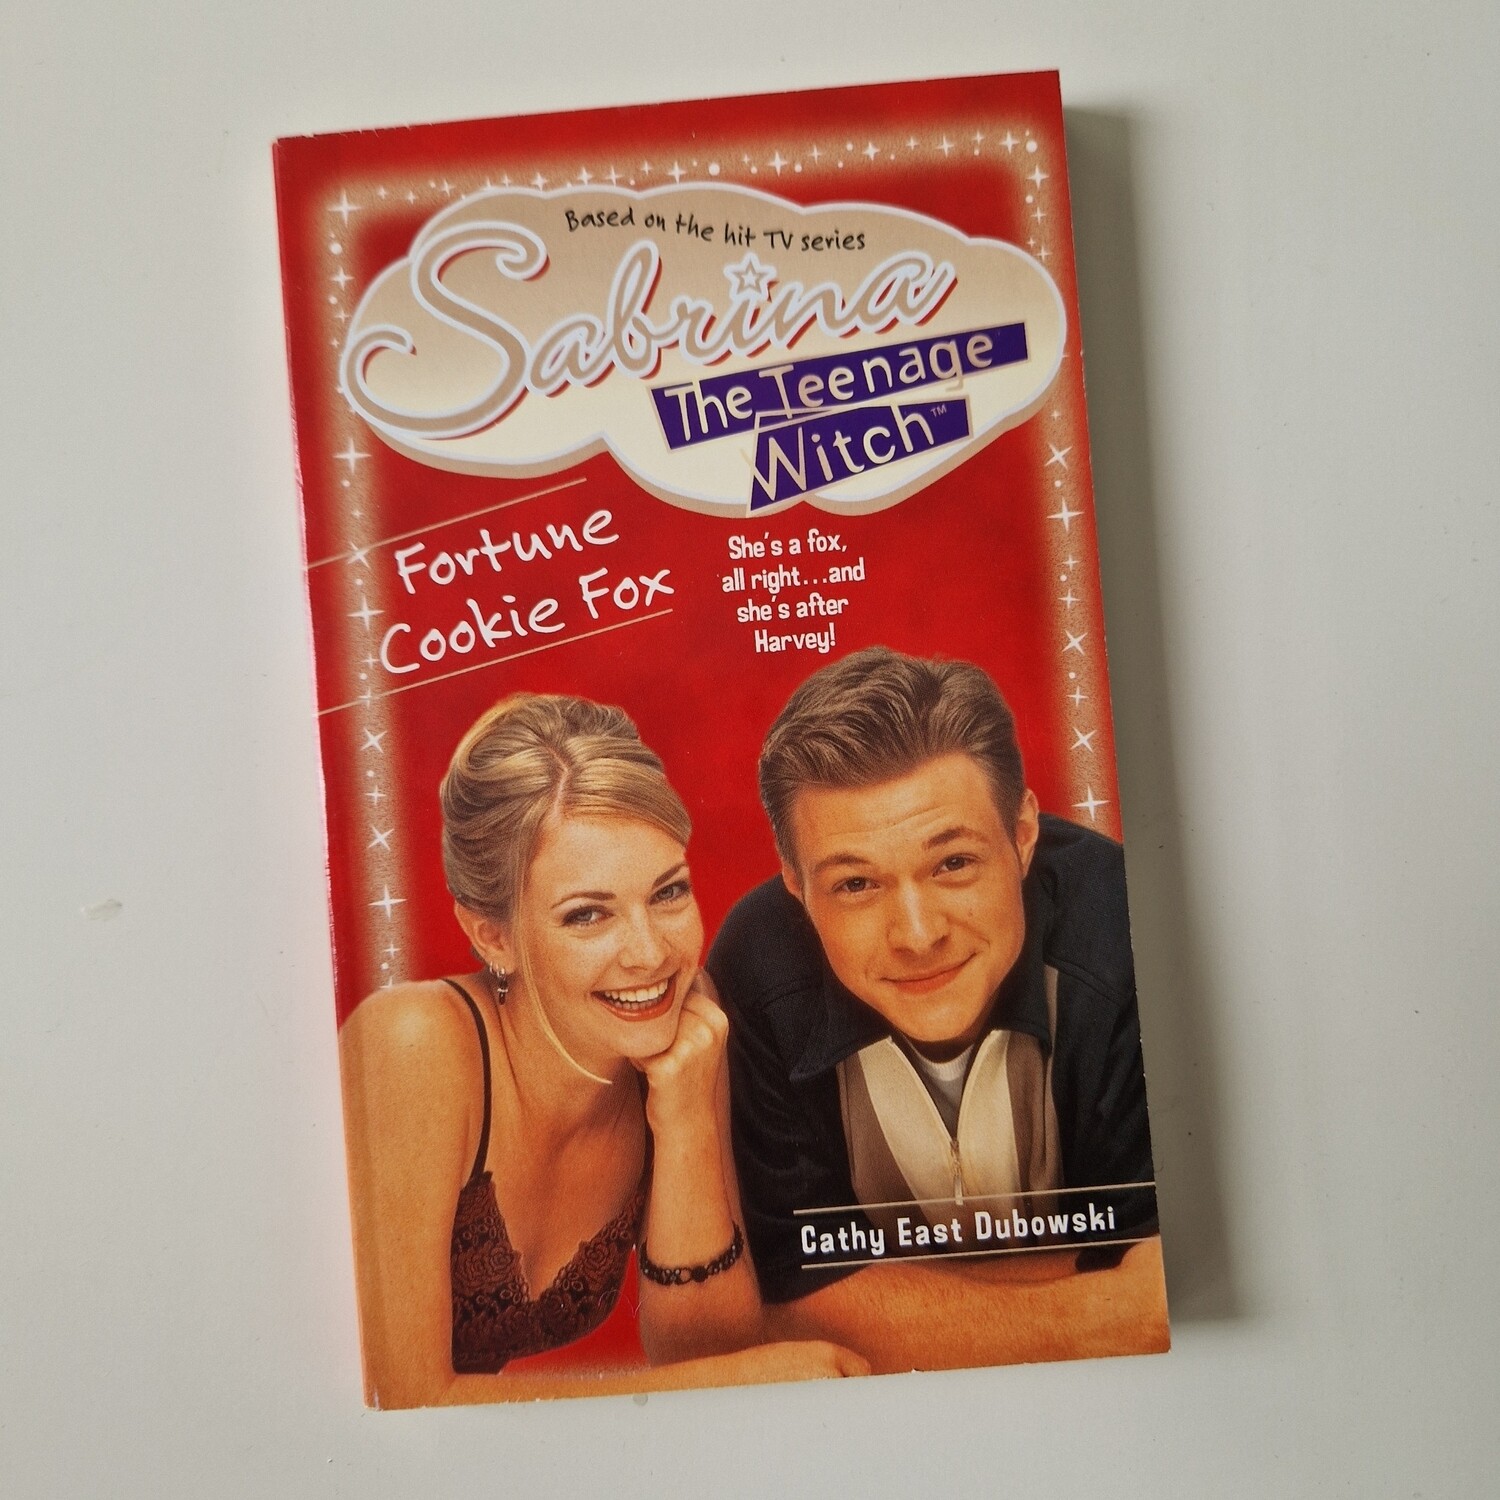 Sabrina The Teenage Witch 1999 - Fortune Cookie Fox - Notebook - made from a paperback book